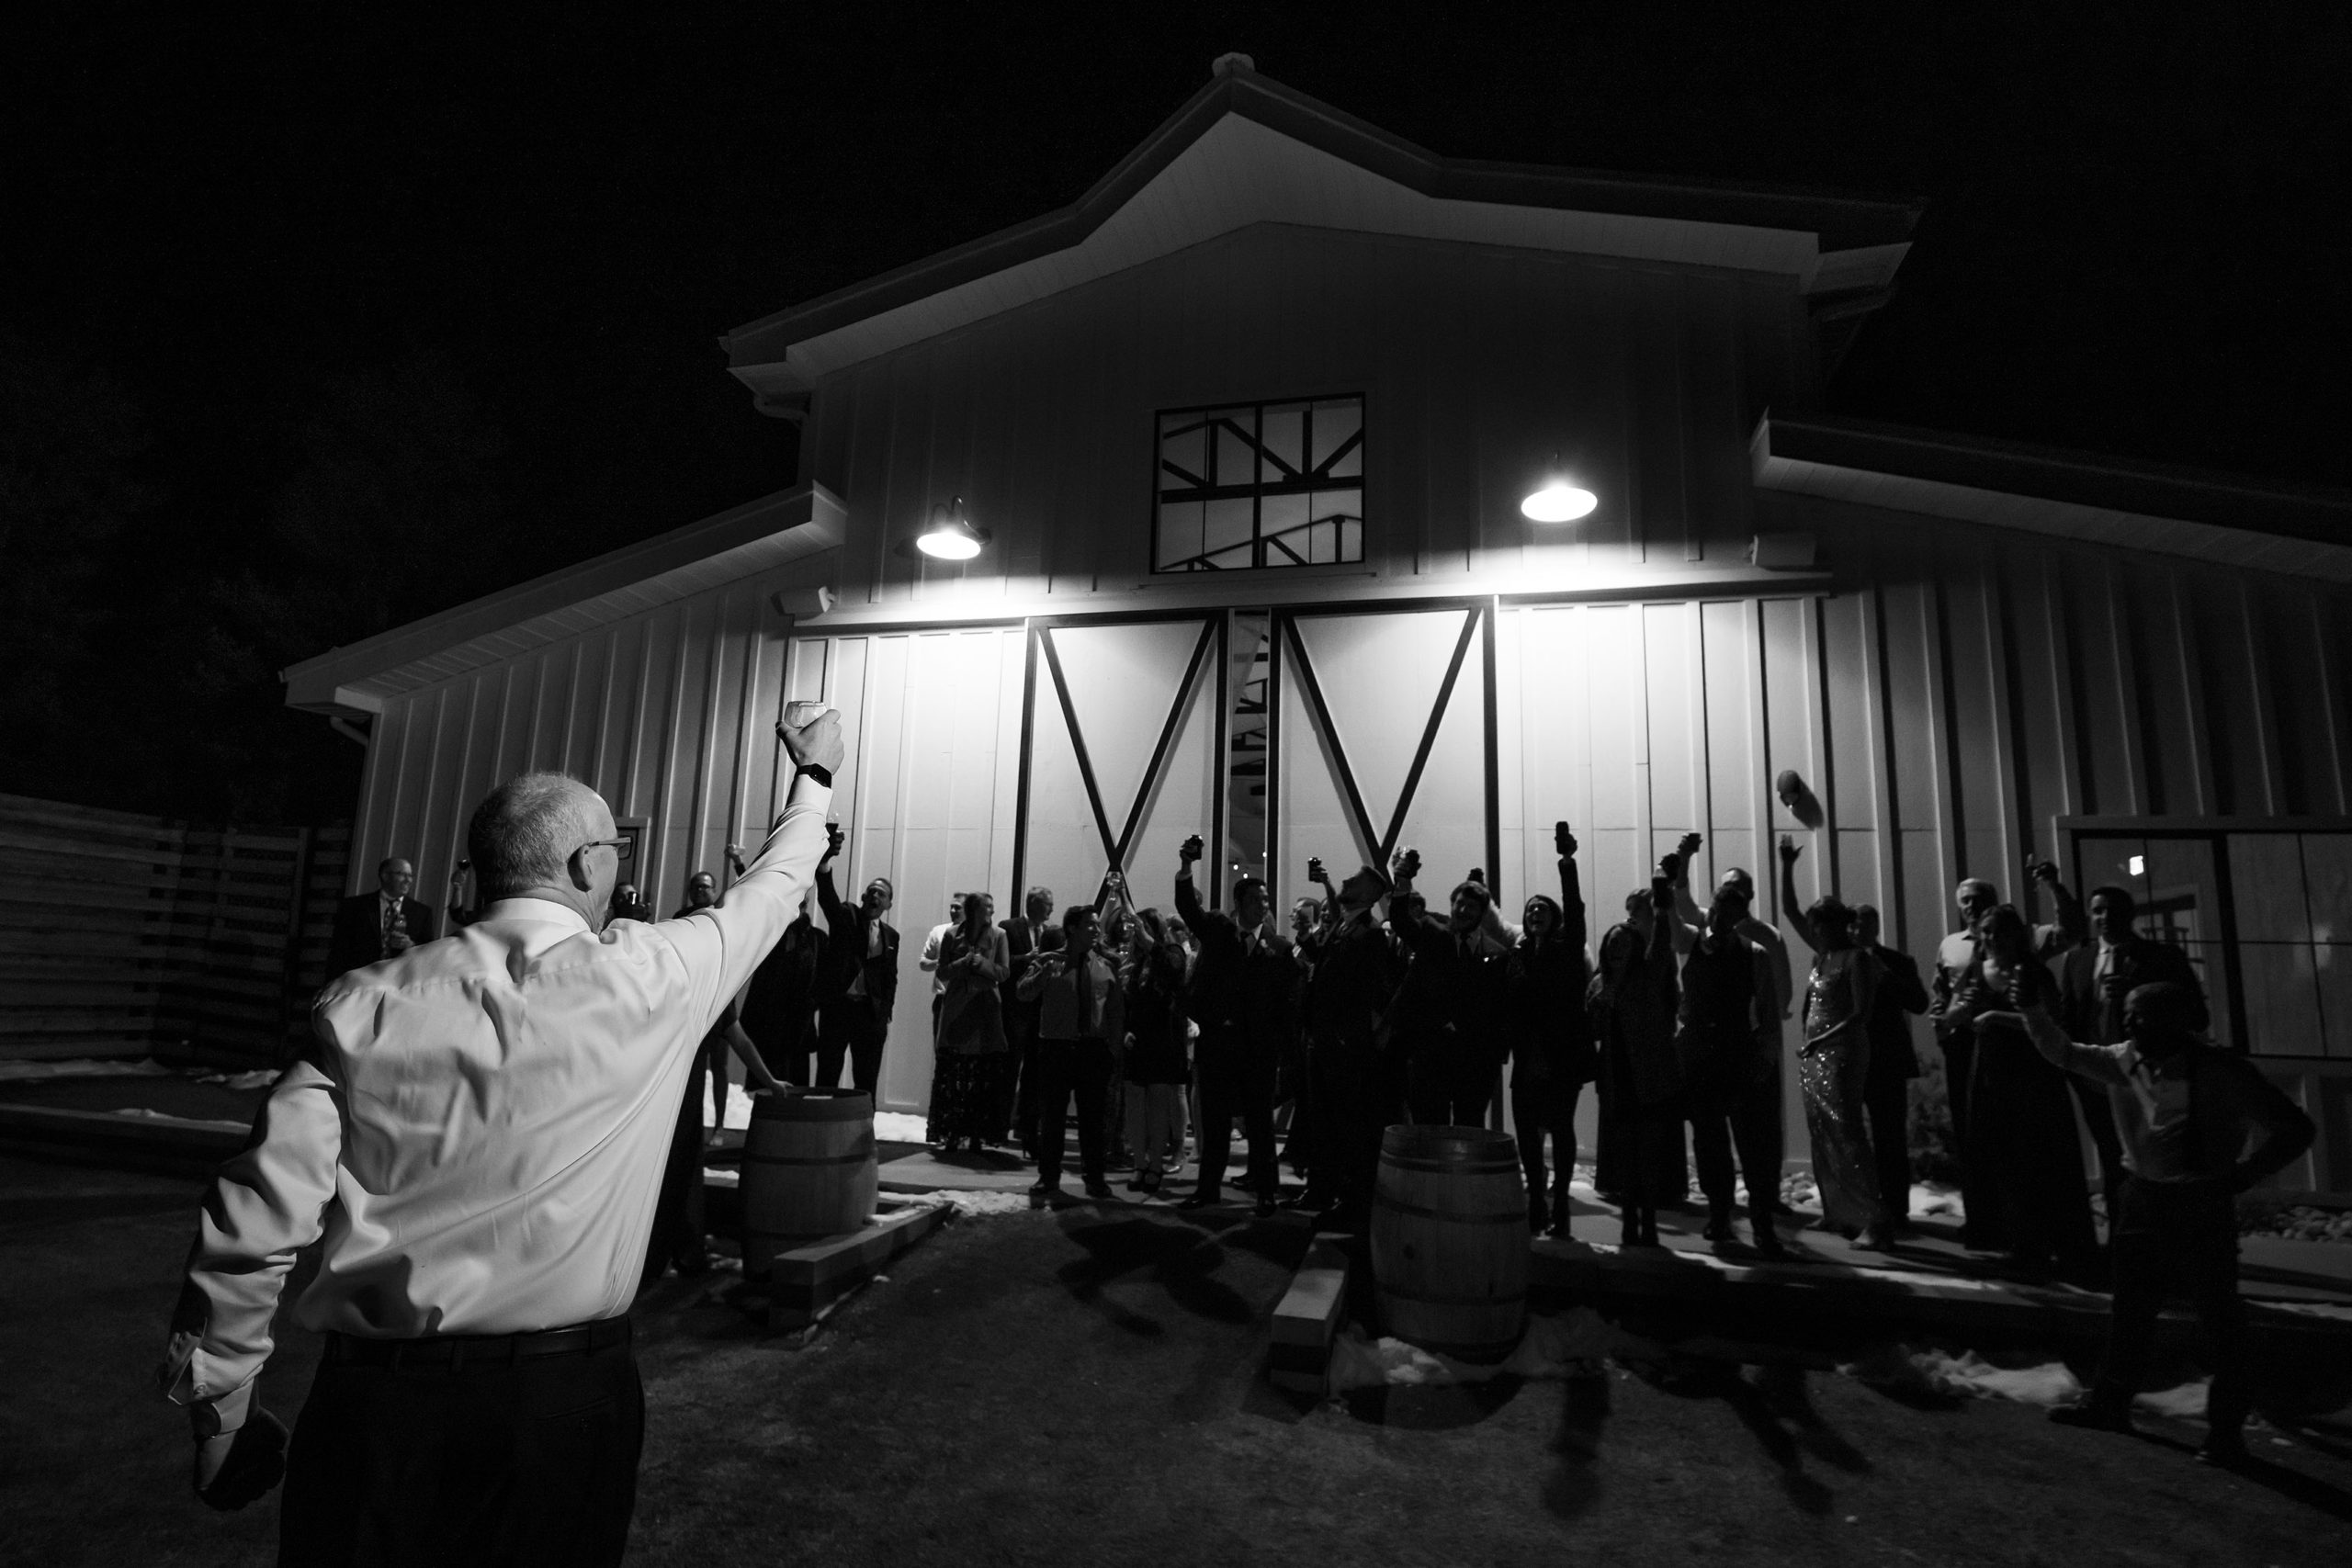 The father of the bride gives a moonlight toast outside of Woodlands wedding venue during the reception